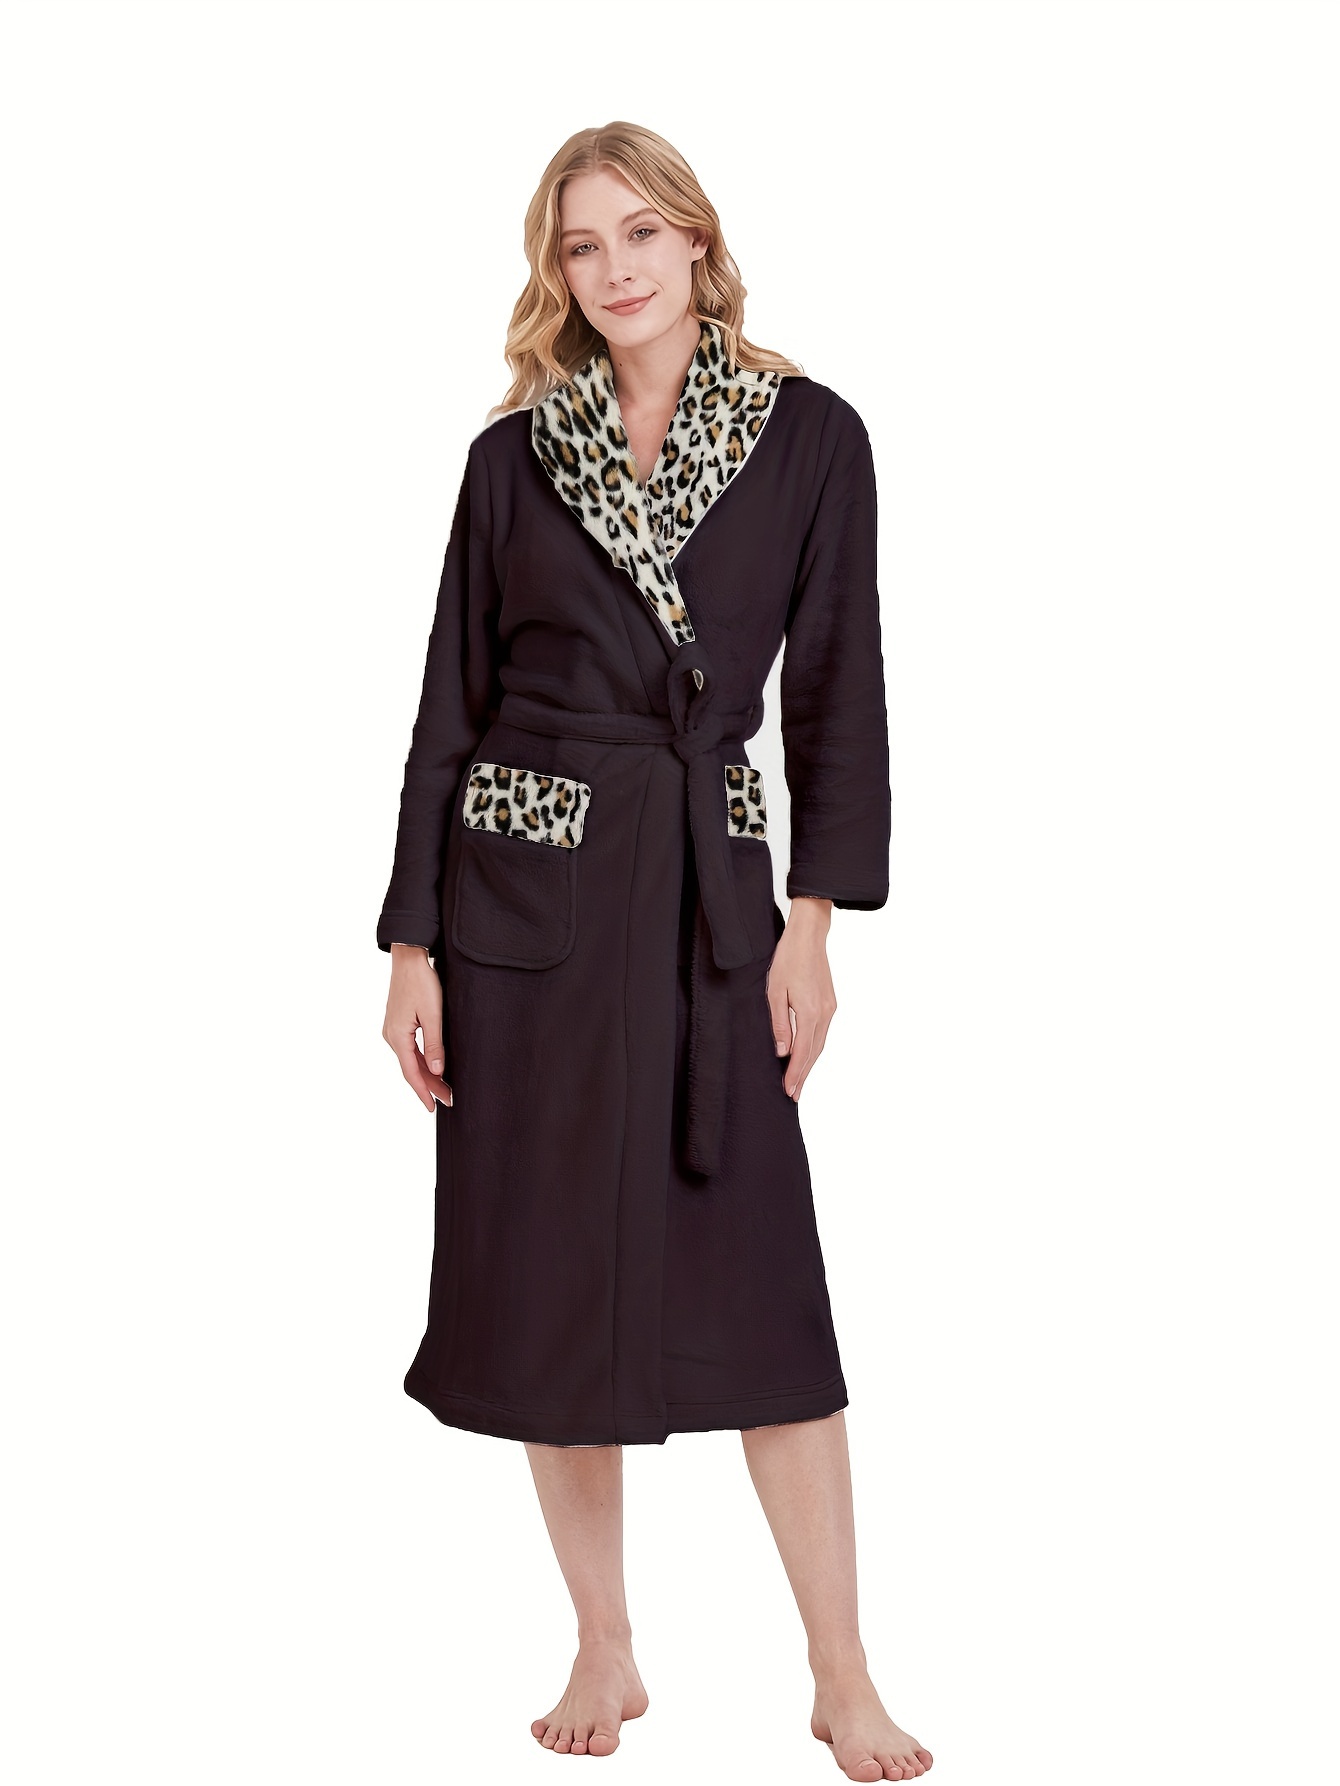 We Are The Others Jules Longline Blazer, Leopard Jacquard, Robe Boutique